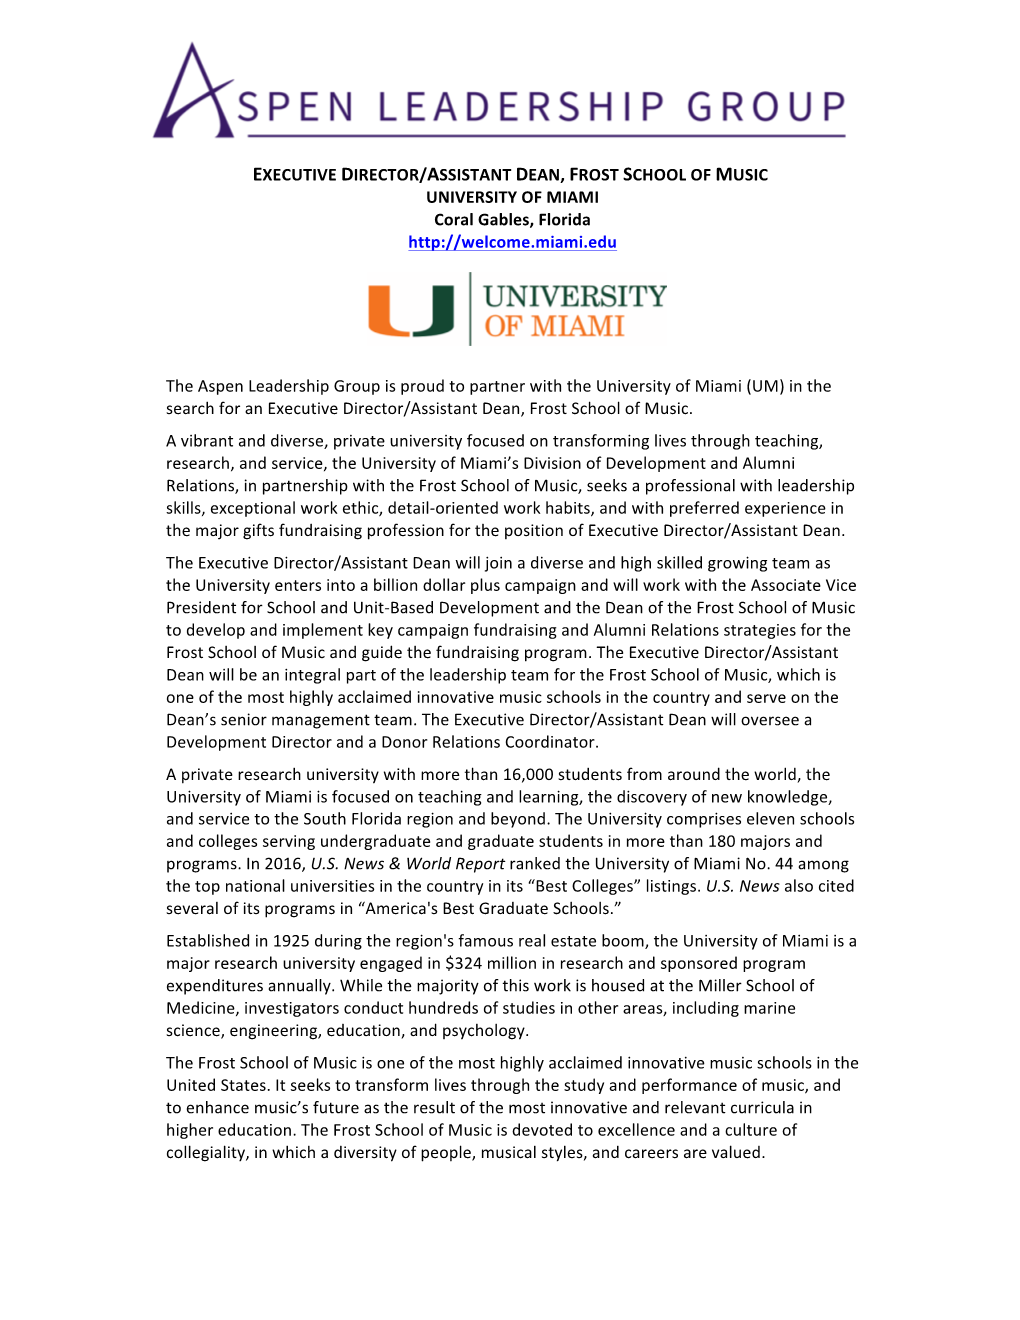 EXECUTIVE DIRECTOR/ASSISTANT DEAN, FROST SCHOOL of MUSIC UNIVERSITY of MIAMI Coral Gables, Florida